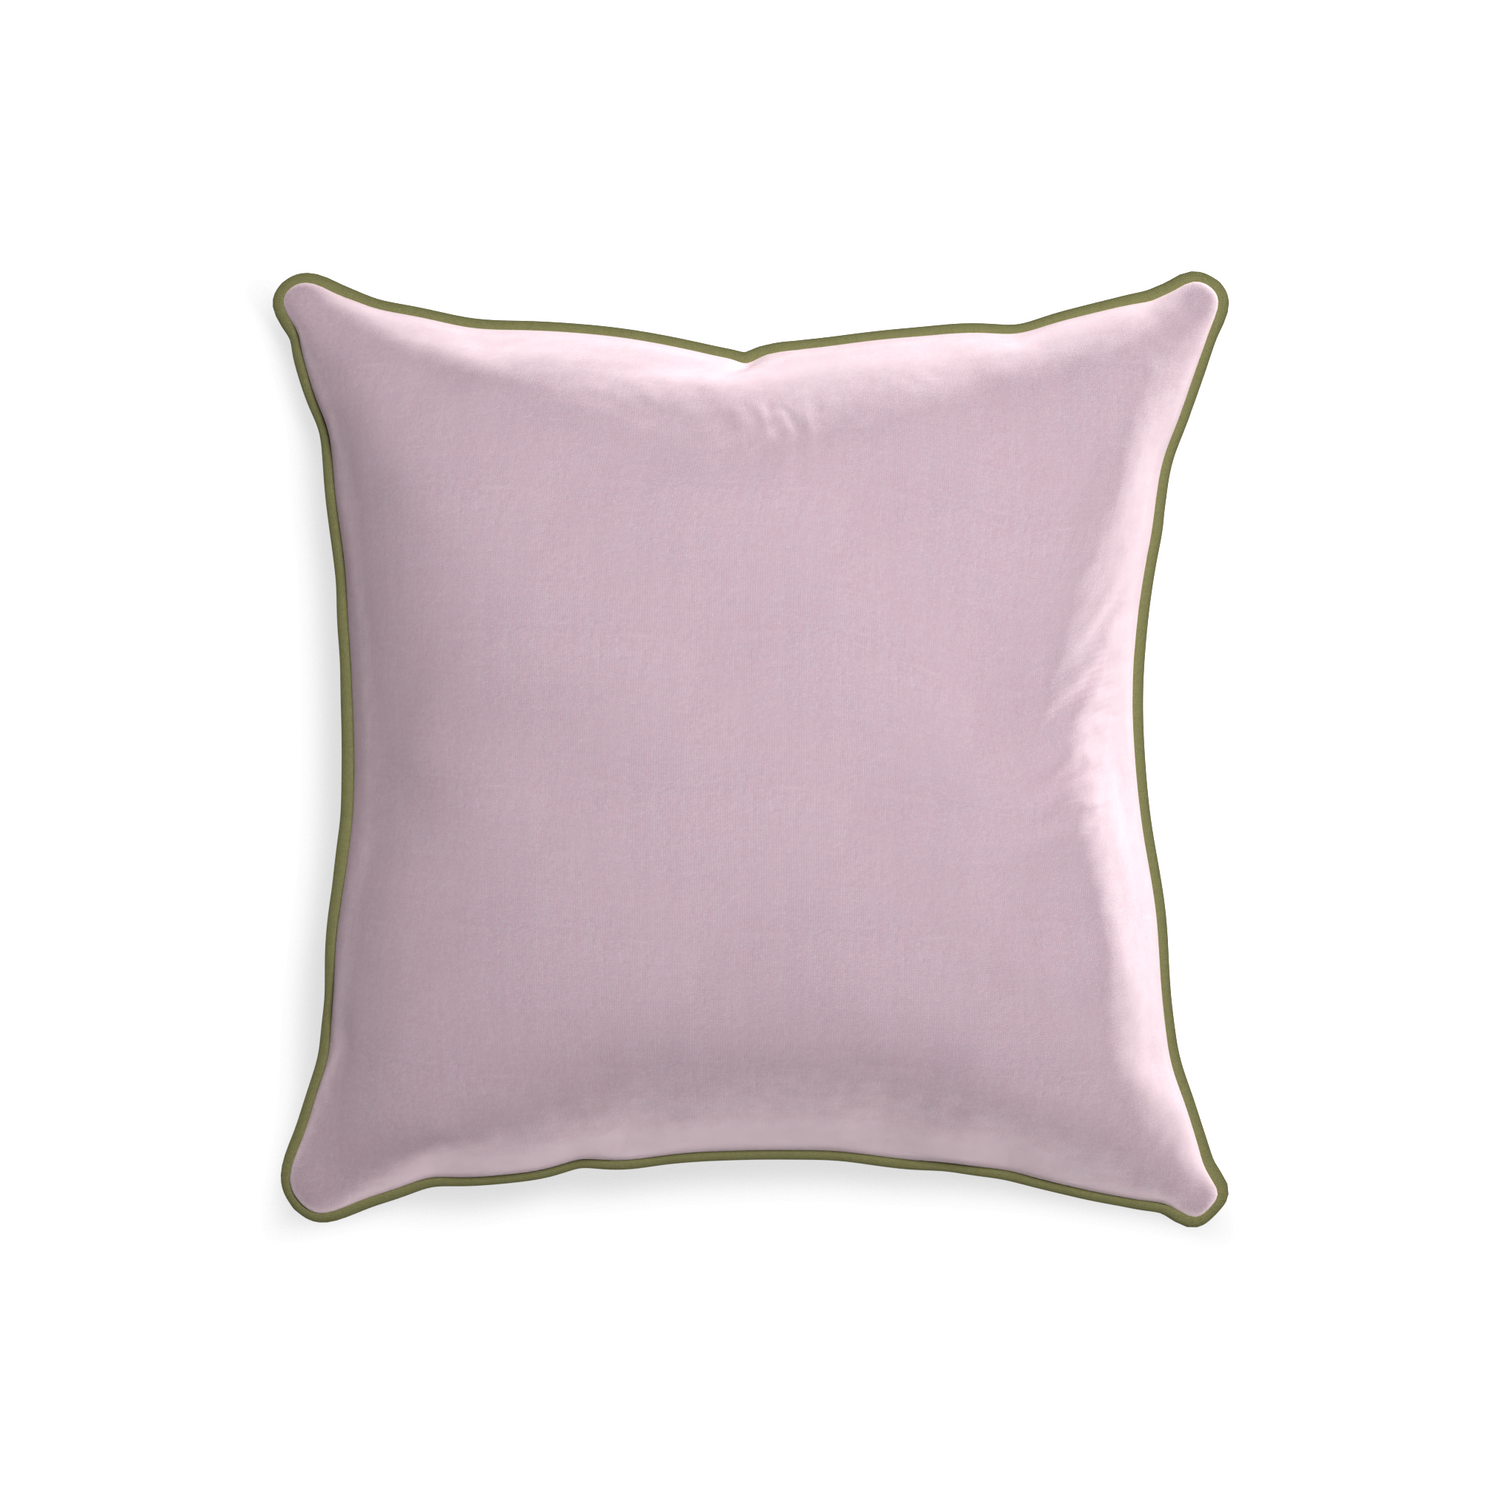 20-square lilac velvet custom pillow with moss piping on white background